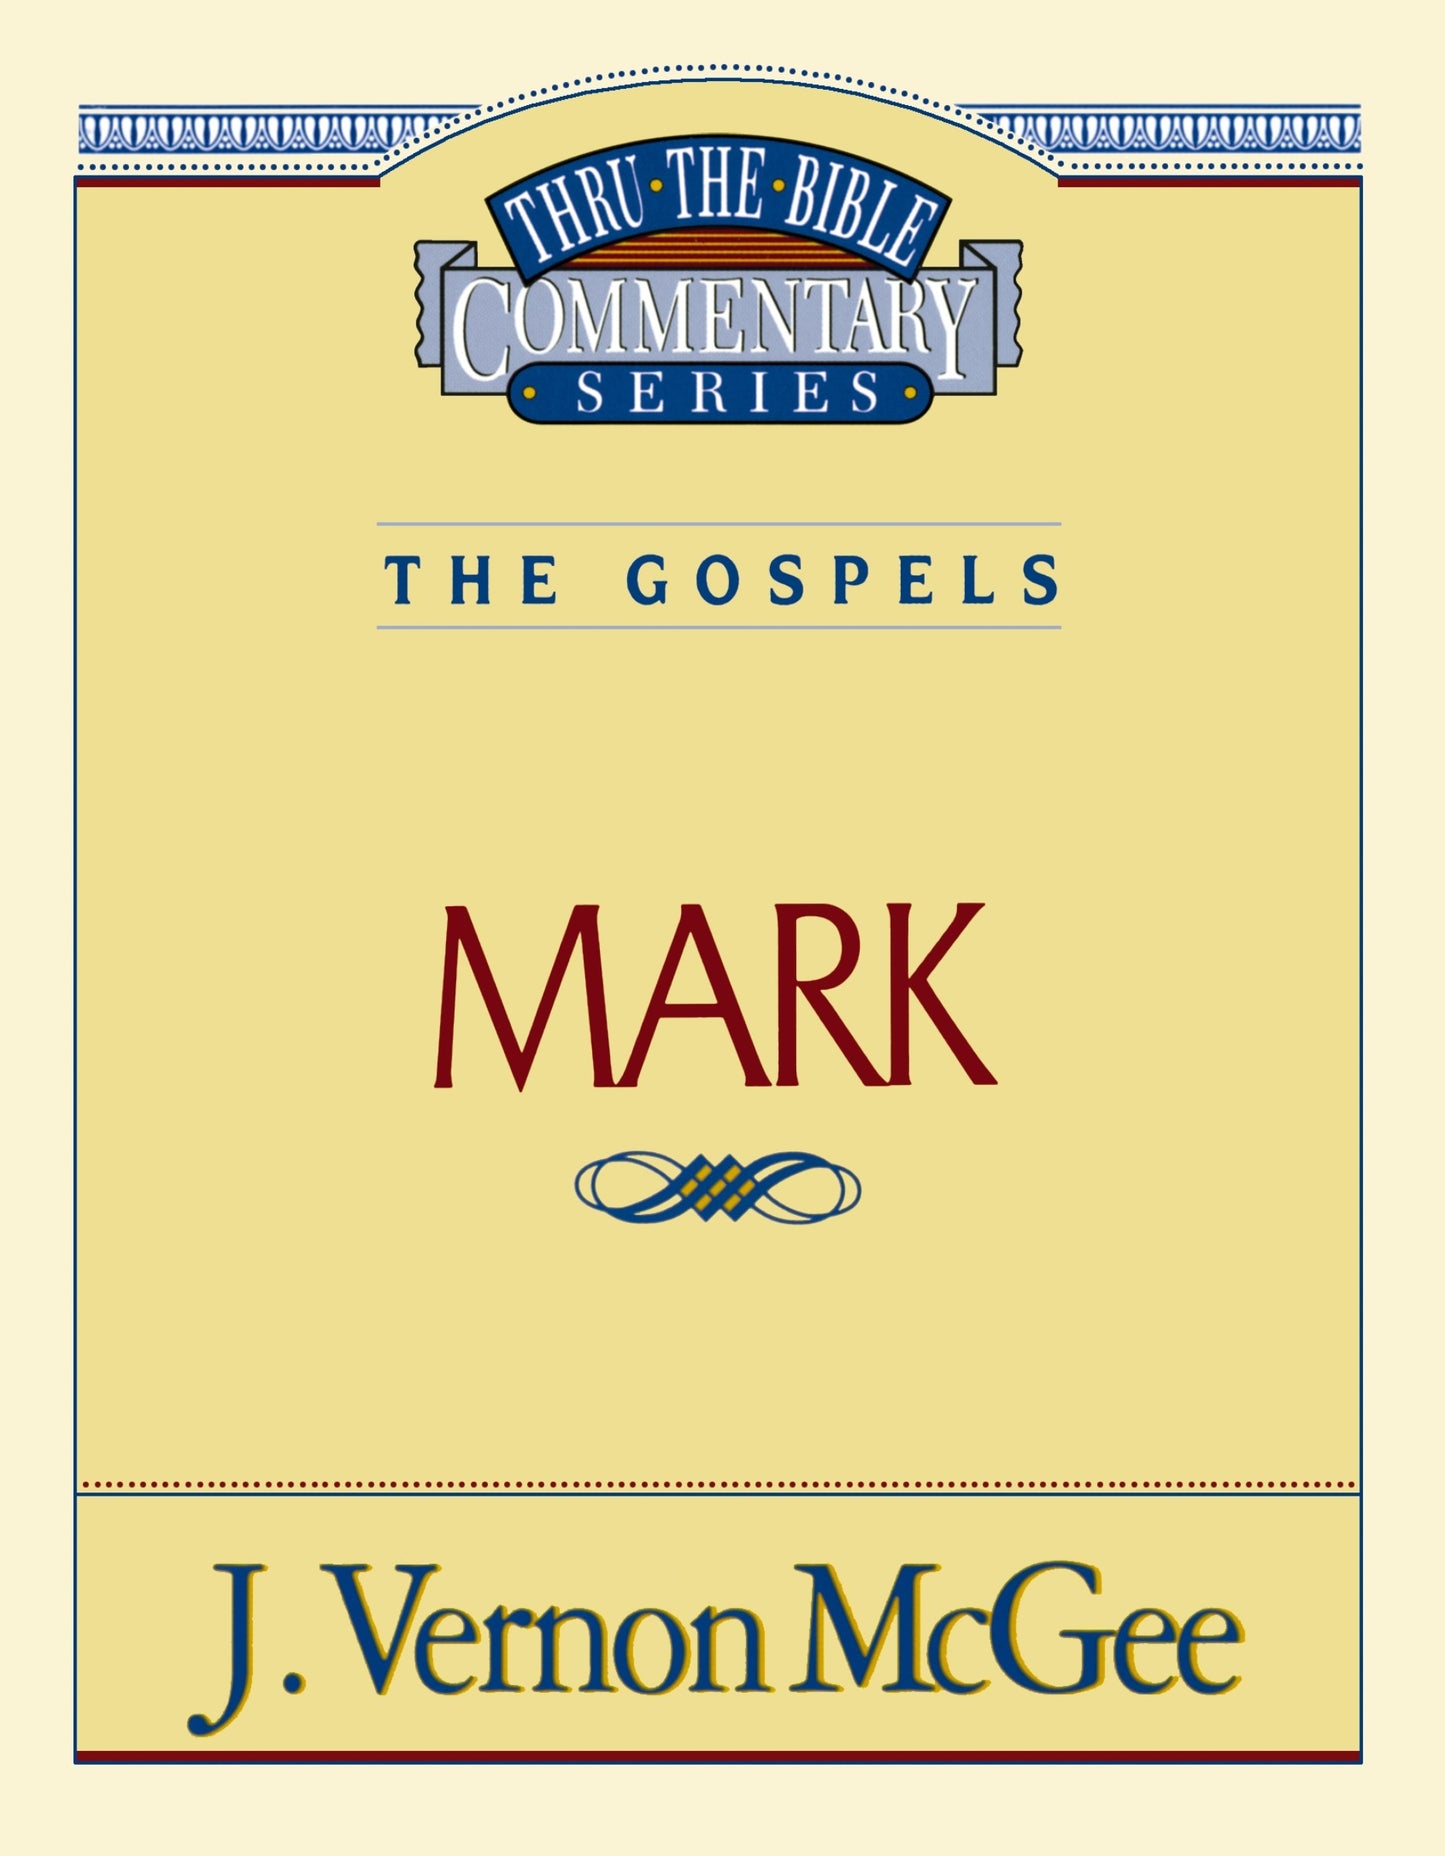 Mark (Thru The Bible Commentary)